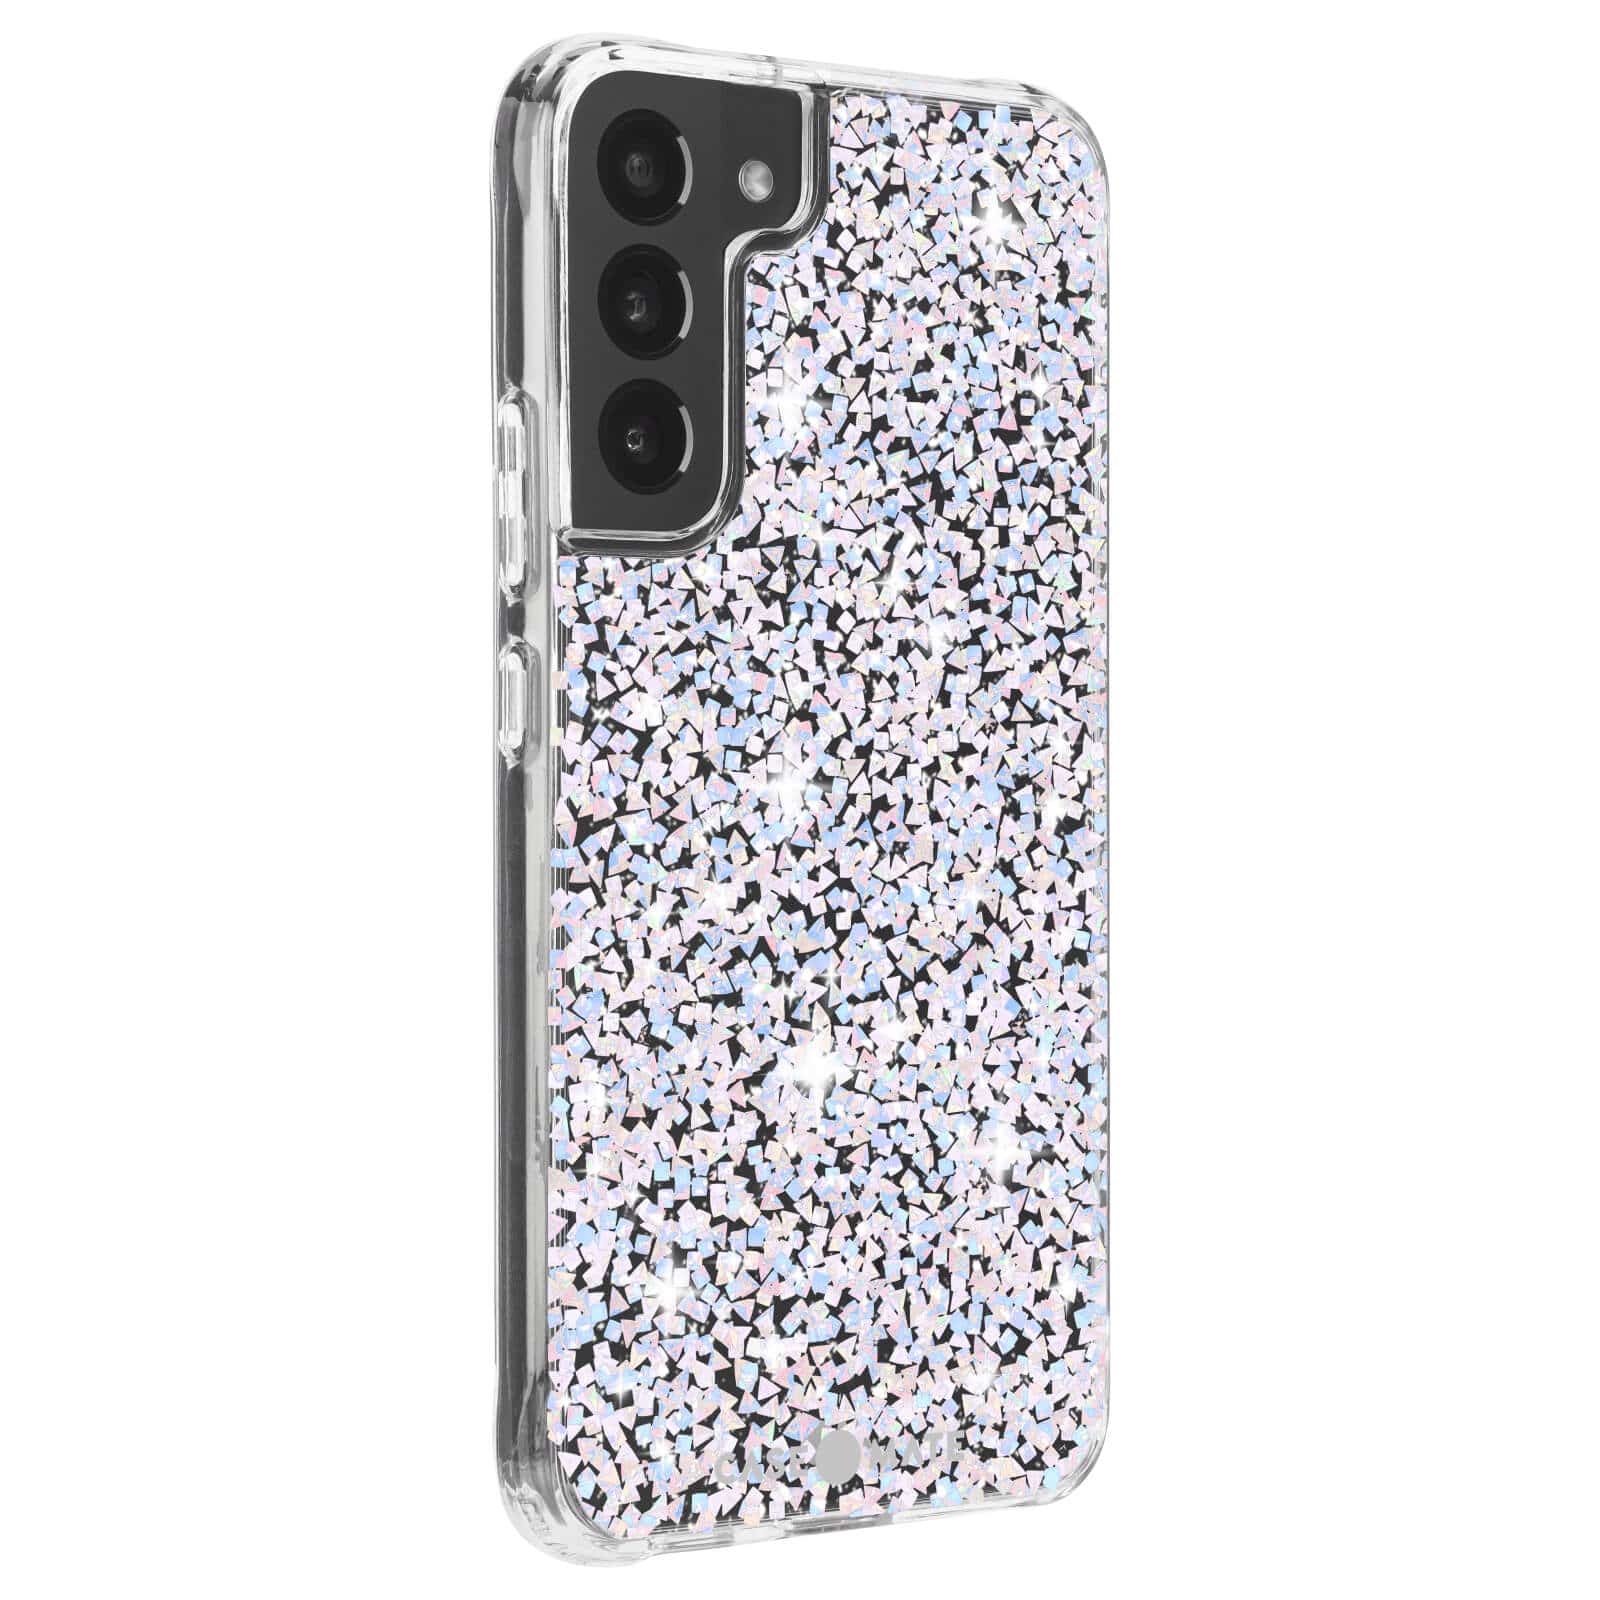 Iridescent Sequin flakes embedded in a clear case for the Galaxy S22+. color::Twinkle Diamond